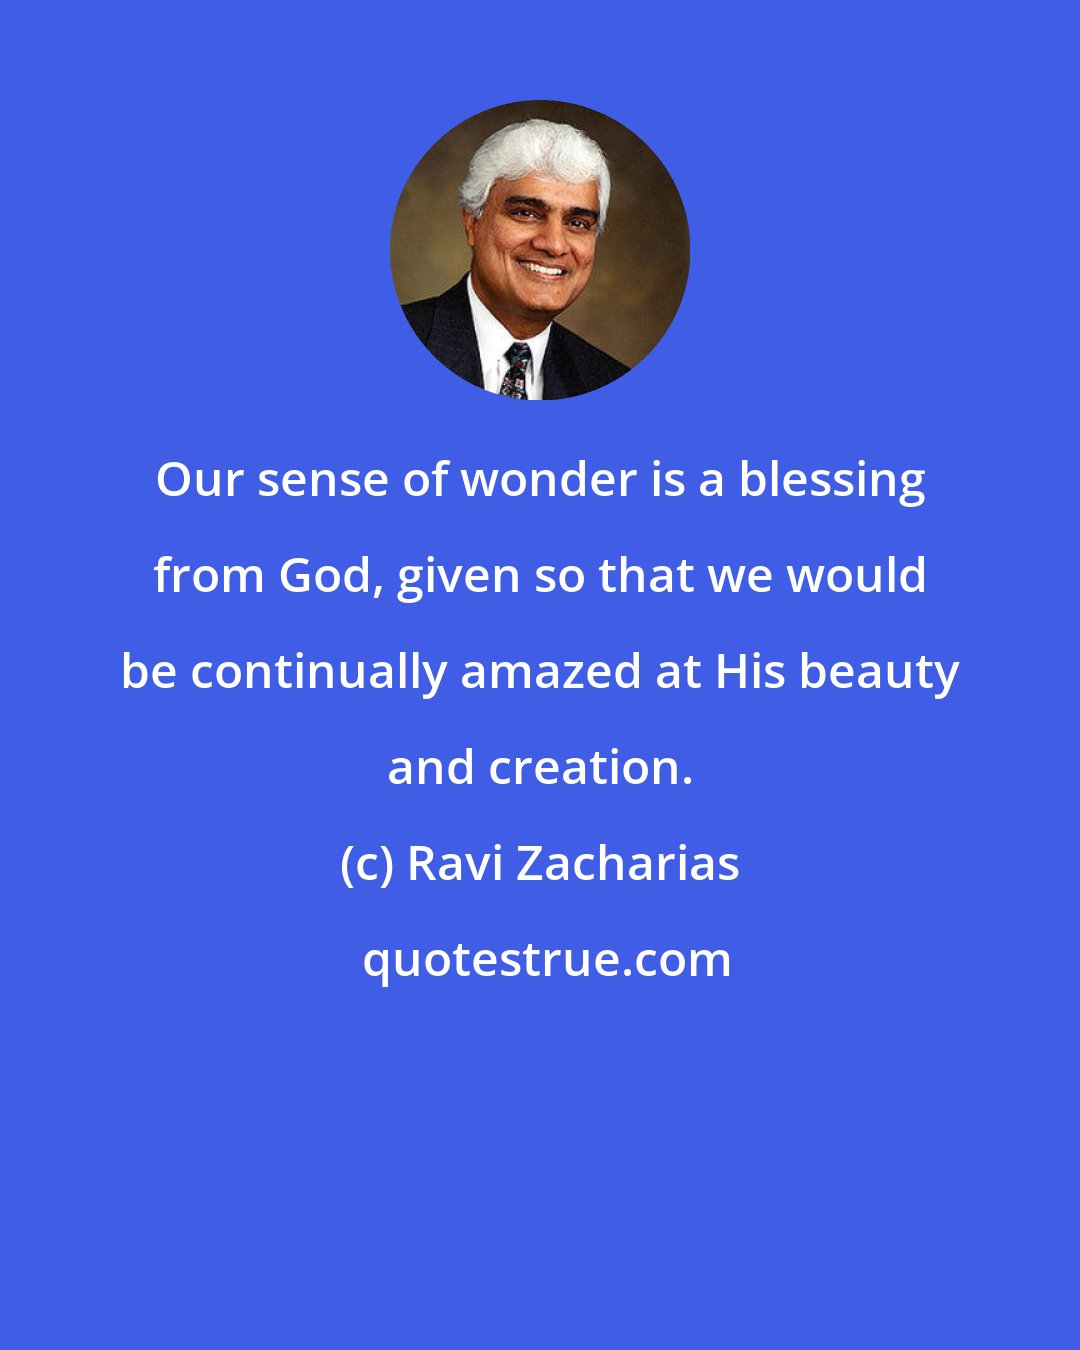 Ravi Zacharias: Our sense of wonder is a blessing from God, given so that we would be continually amazed at His beauty and creation.